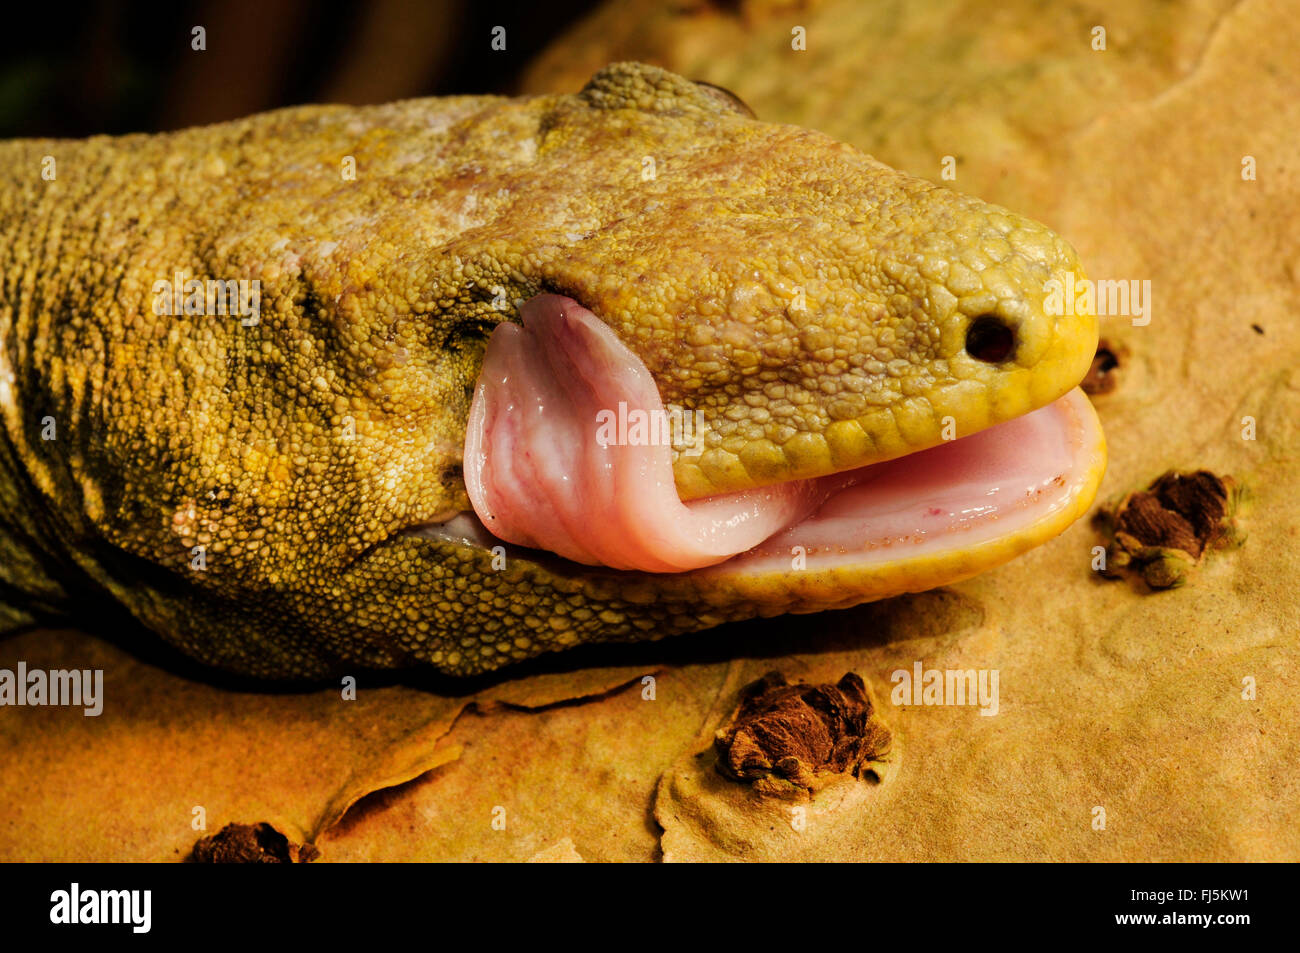 New Caledonian giant gecko, Leach's giant gecko, New Caledonia Giant Gecko   (Rhacodactylus leachianus, Rhacodactylus leachianus henkeli  ), licks on its scarred eye wound, New Caledonia, ╬le des Pins Stock Photo